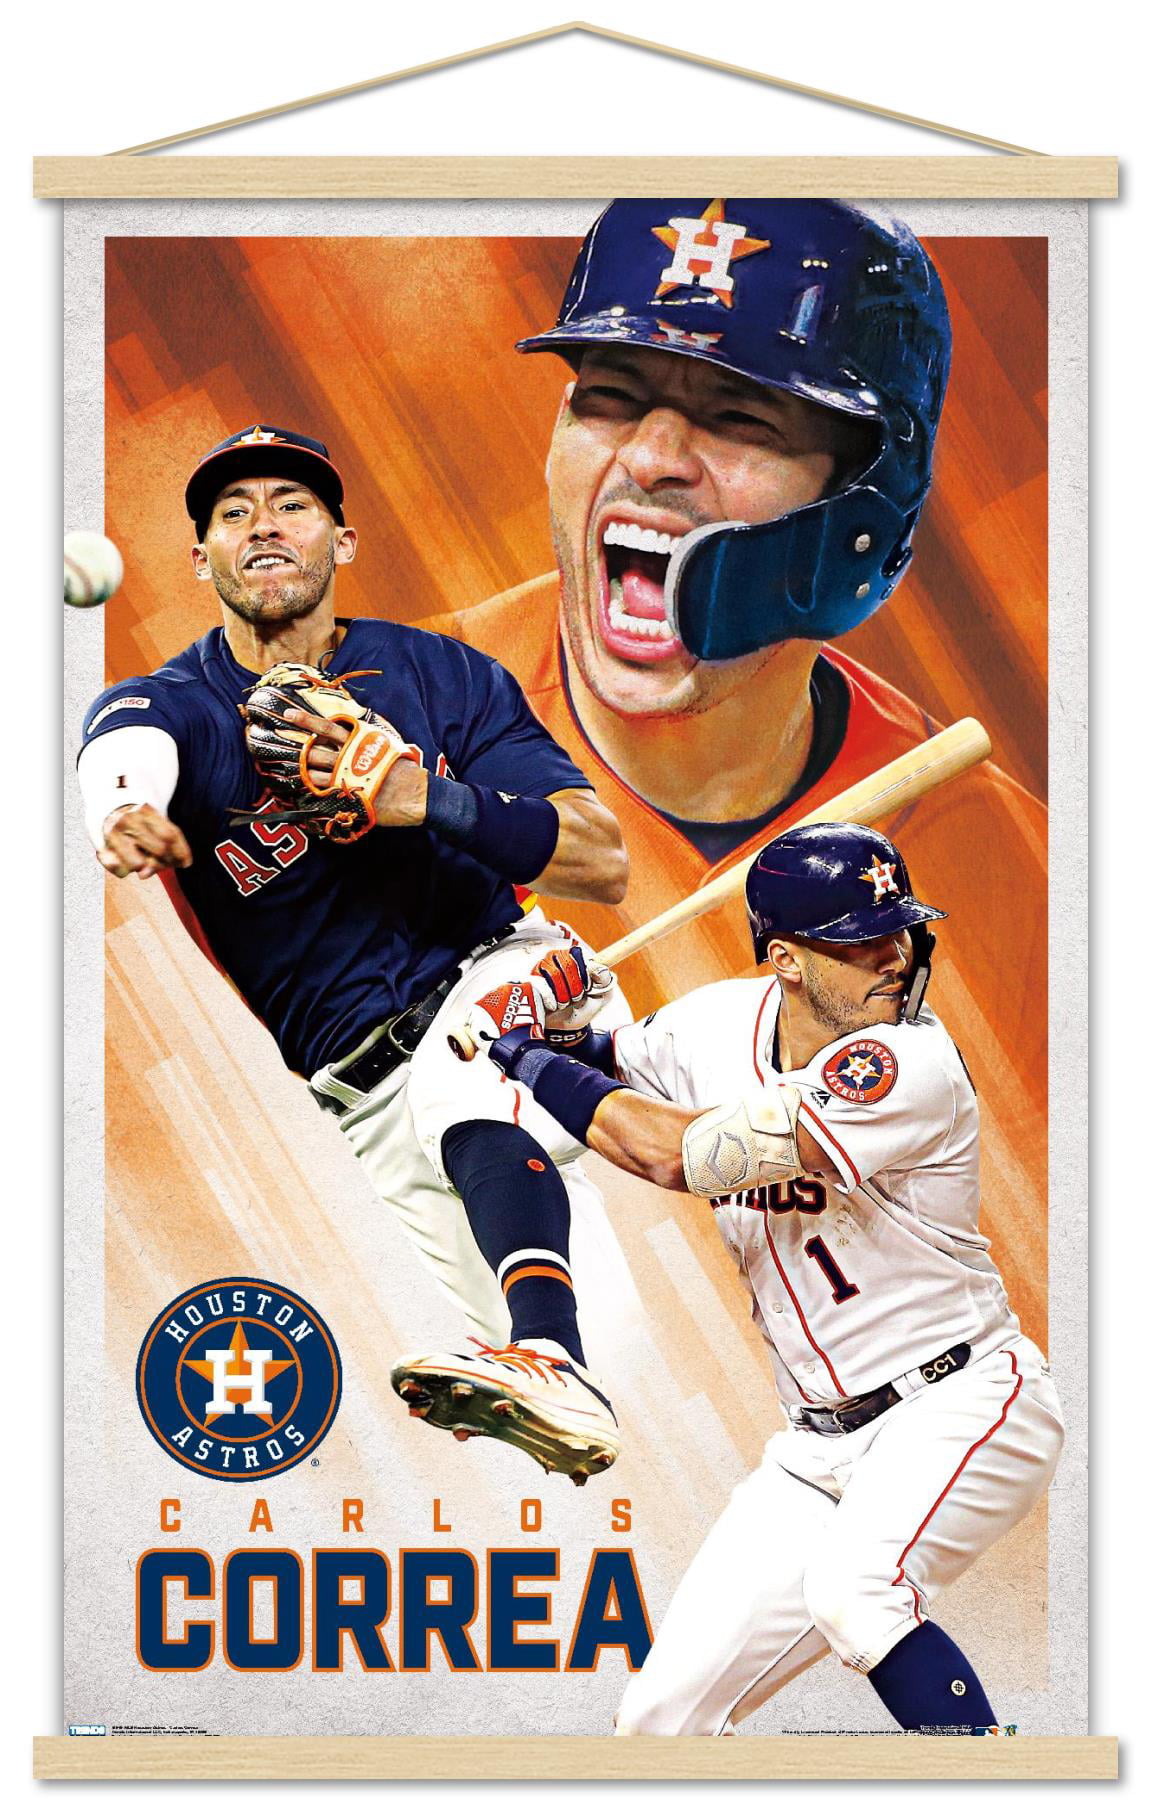 Carry the Freight: Carlos Correa, 06/22/2021